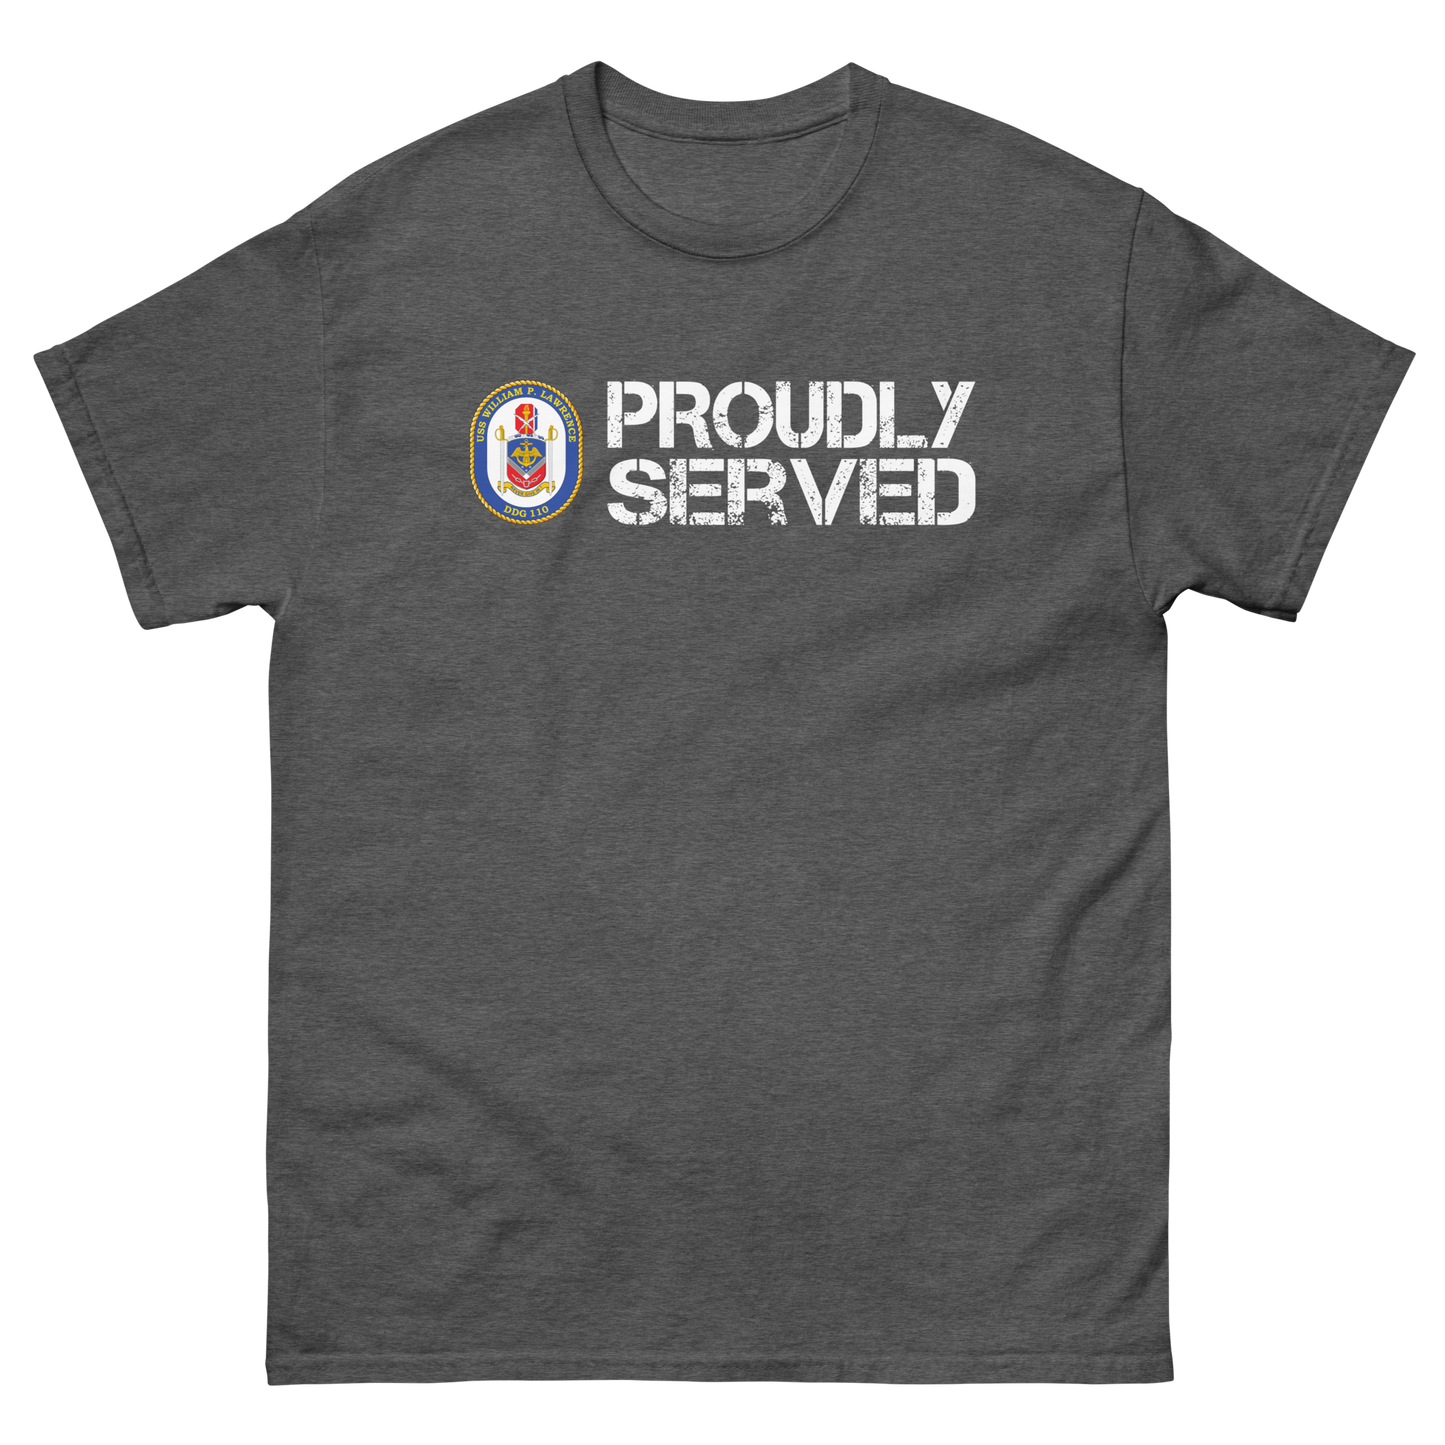 USS William P. Lawrence Proudly Served Short Sleeve Tee